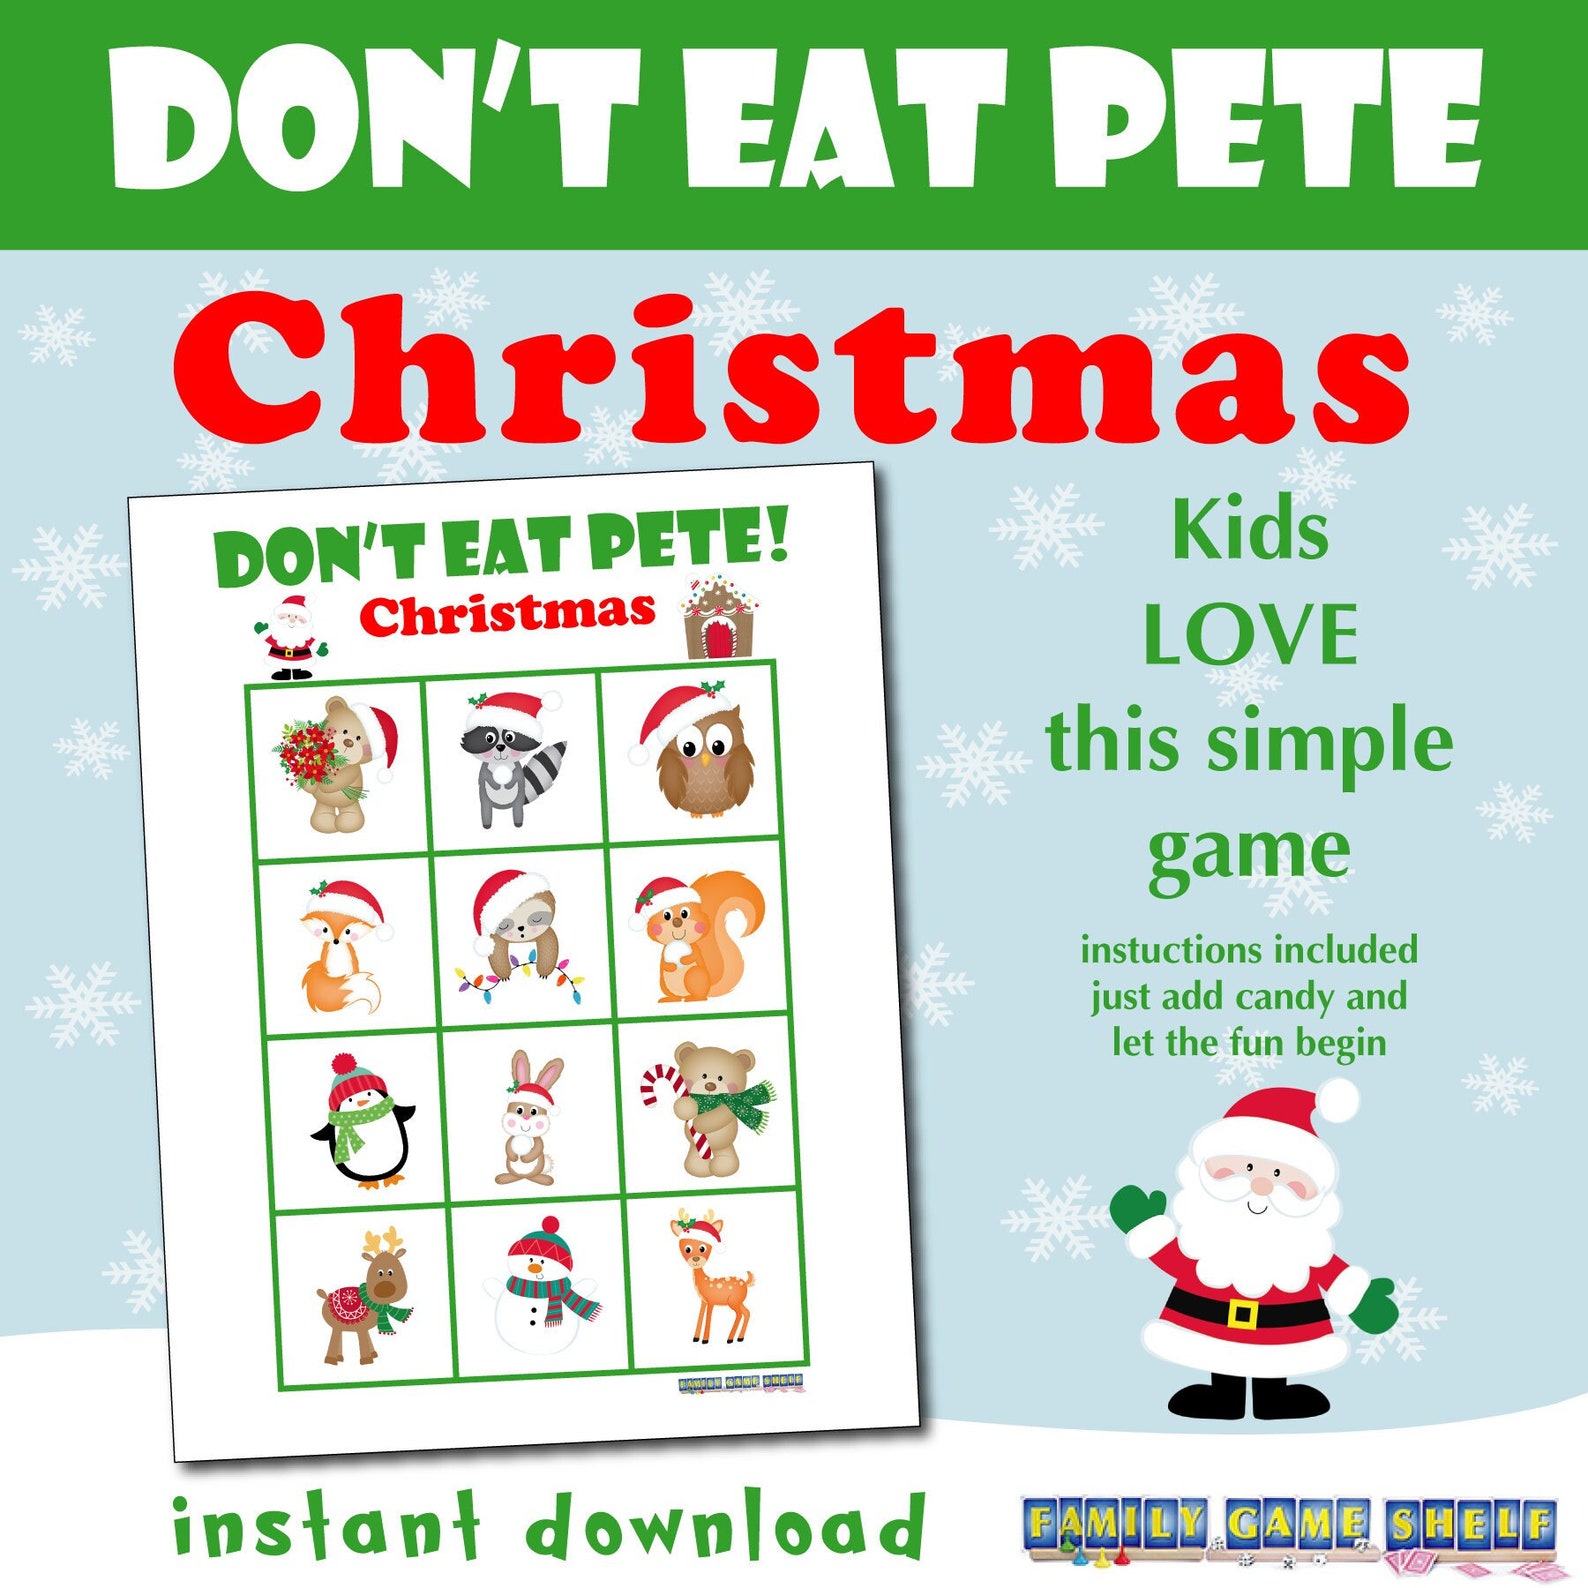 printable-don-t-eat-pete-christmas-themed-game-for-kids-etsy